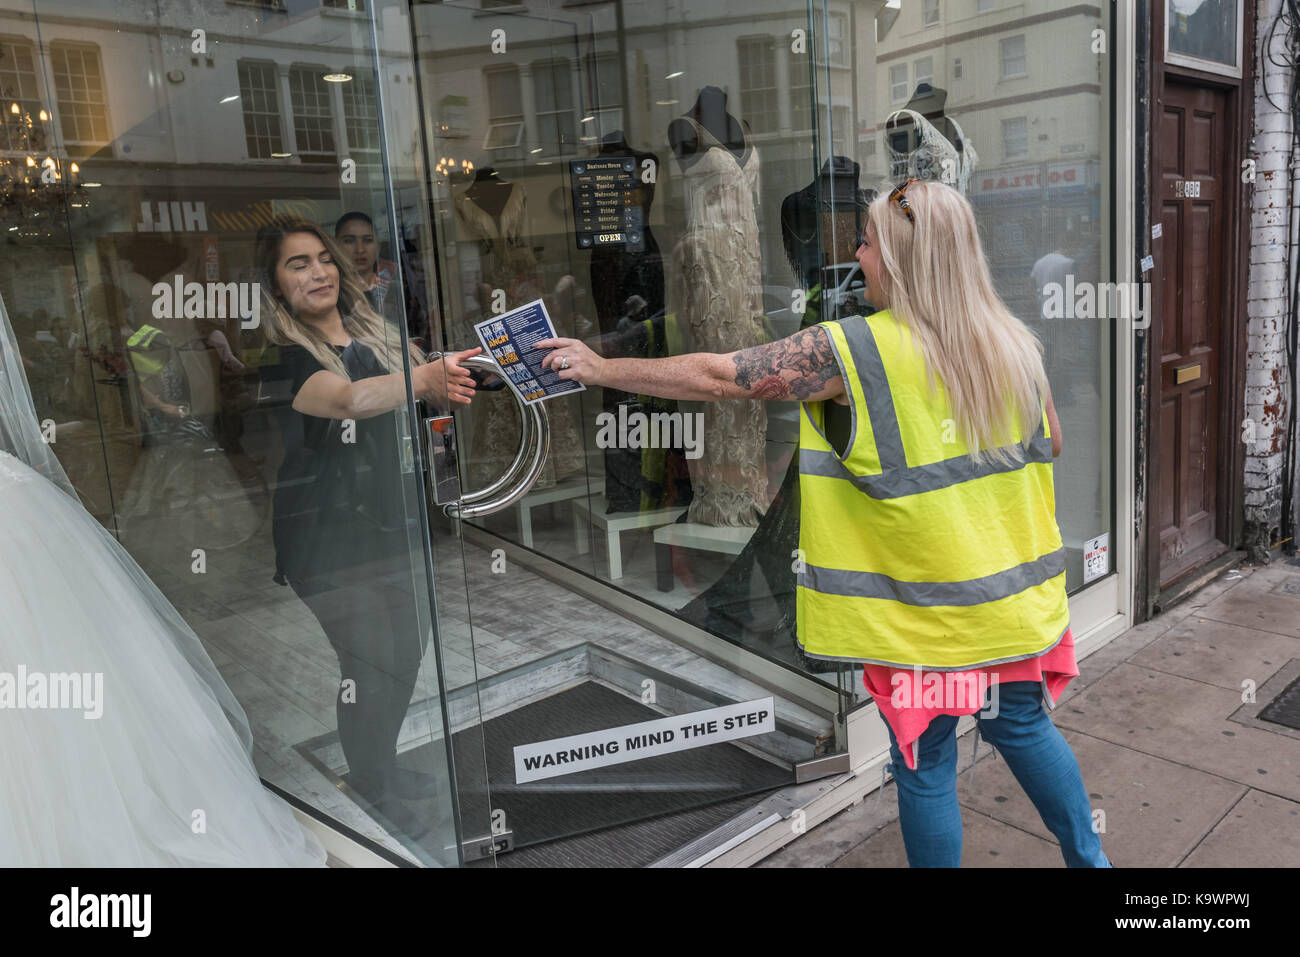 London, UK. 23rd Sep, 2017. London, UK. 23rd September 2017. One of the march stewards hands a leaflet to a woman in a shop as hundreds march in North London from a rally in Tottenham to Finsbury Park against the so called Haringey Development Vehicle, under which Haringey Council is making a huge transfer of council housing to Australian multinational Lendlease. This will result in the imminent demolition of over 1,300 council homes on the Northumberland Park estate, followed by similar loss of social housing across the whole of the borough. At Â£2 billion, his is the largest giveaway o Stock Photo